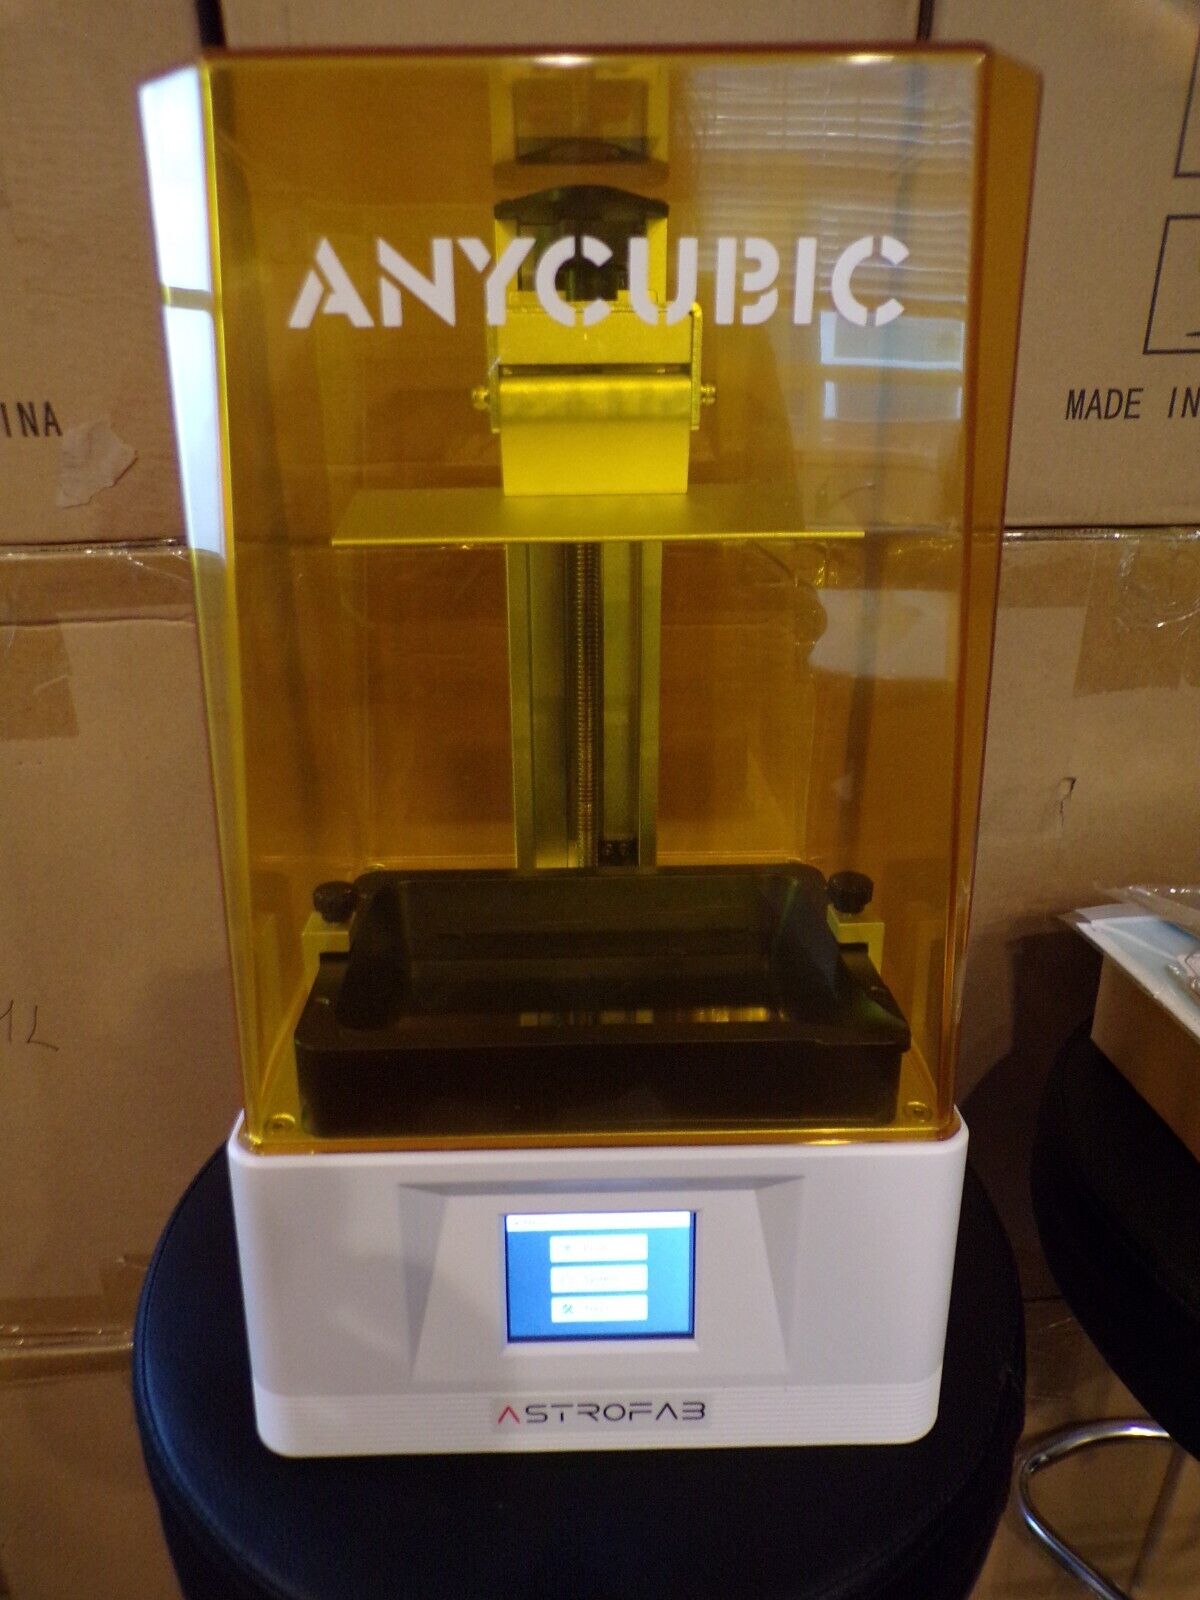 Astro Fab 2KA 3D printer made by AnyCubic Photon Mono 2 With 1 Free 20 OZ resin